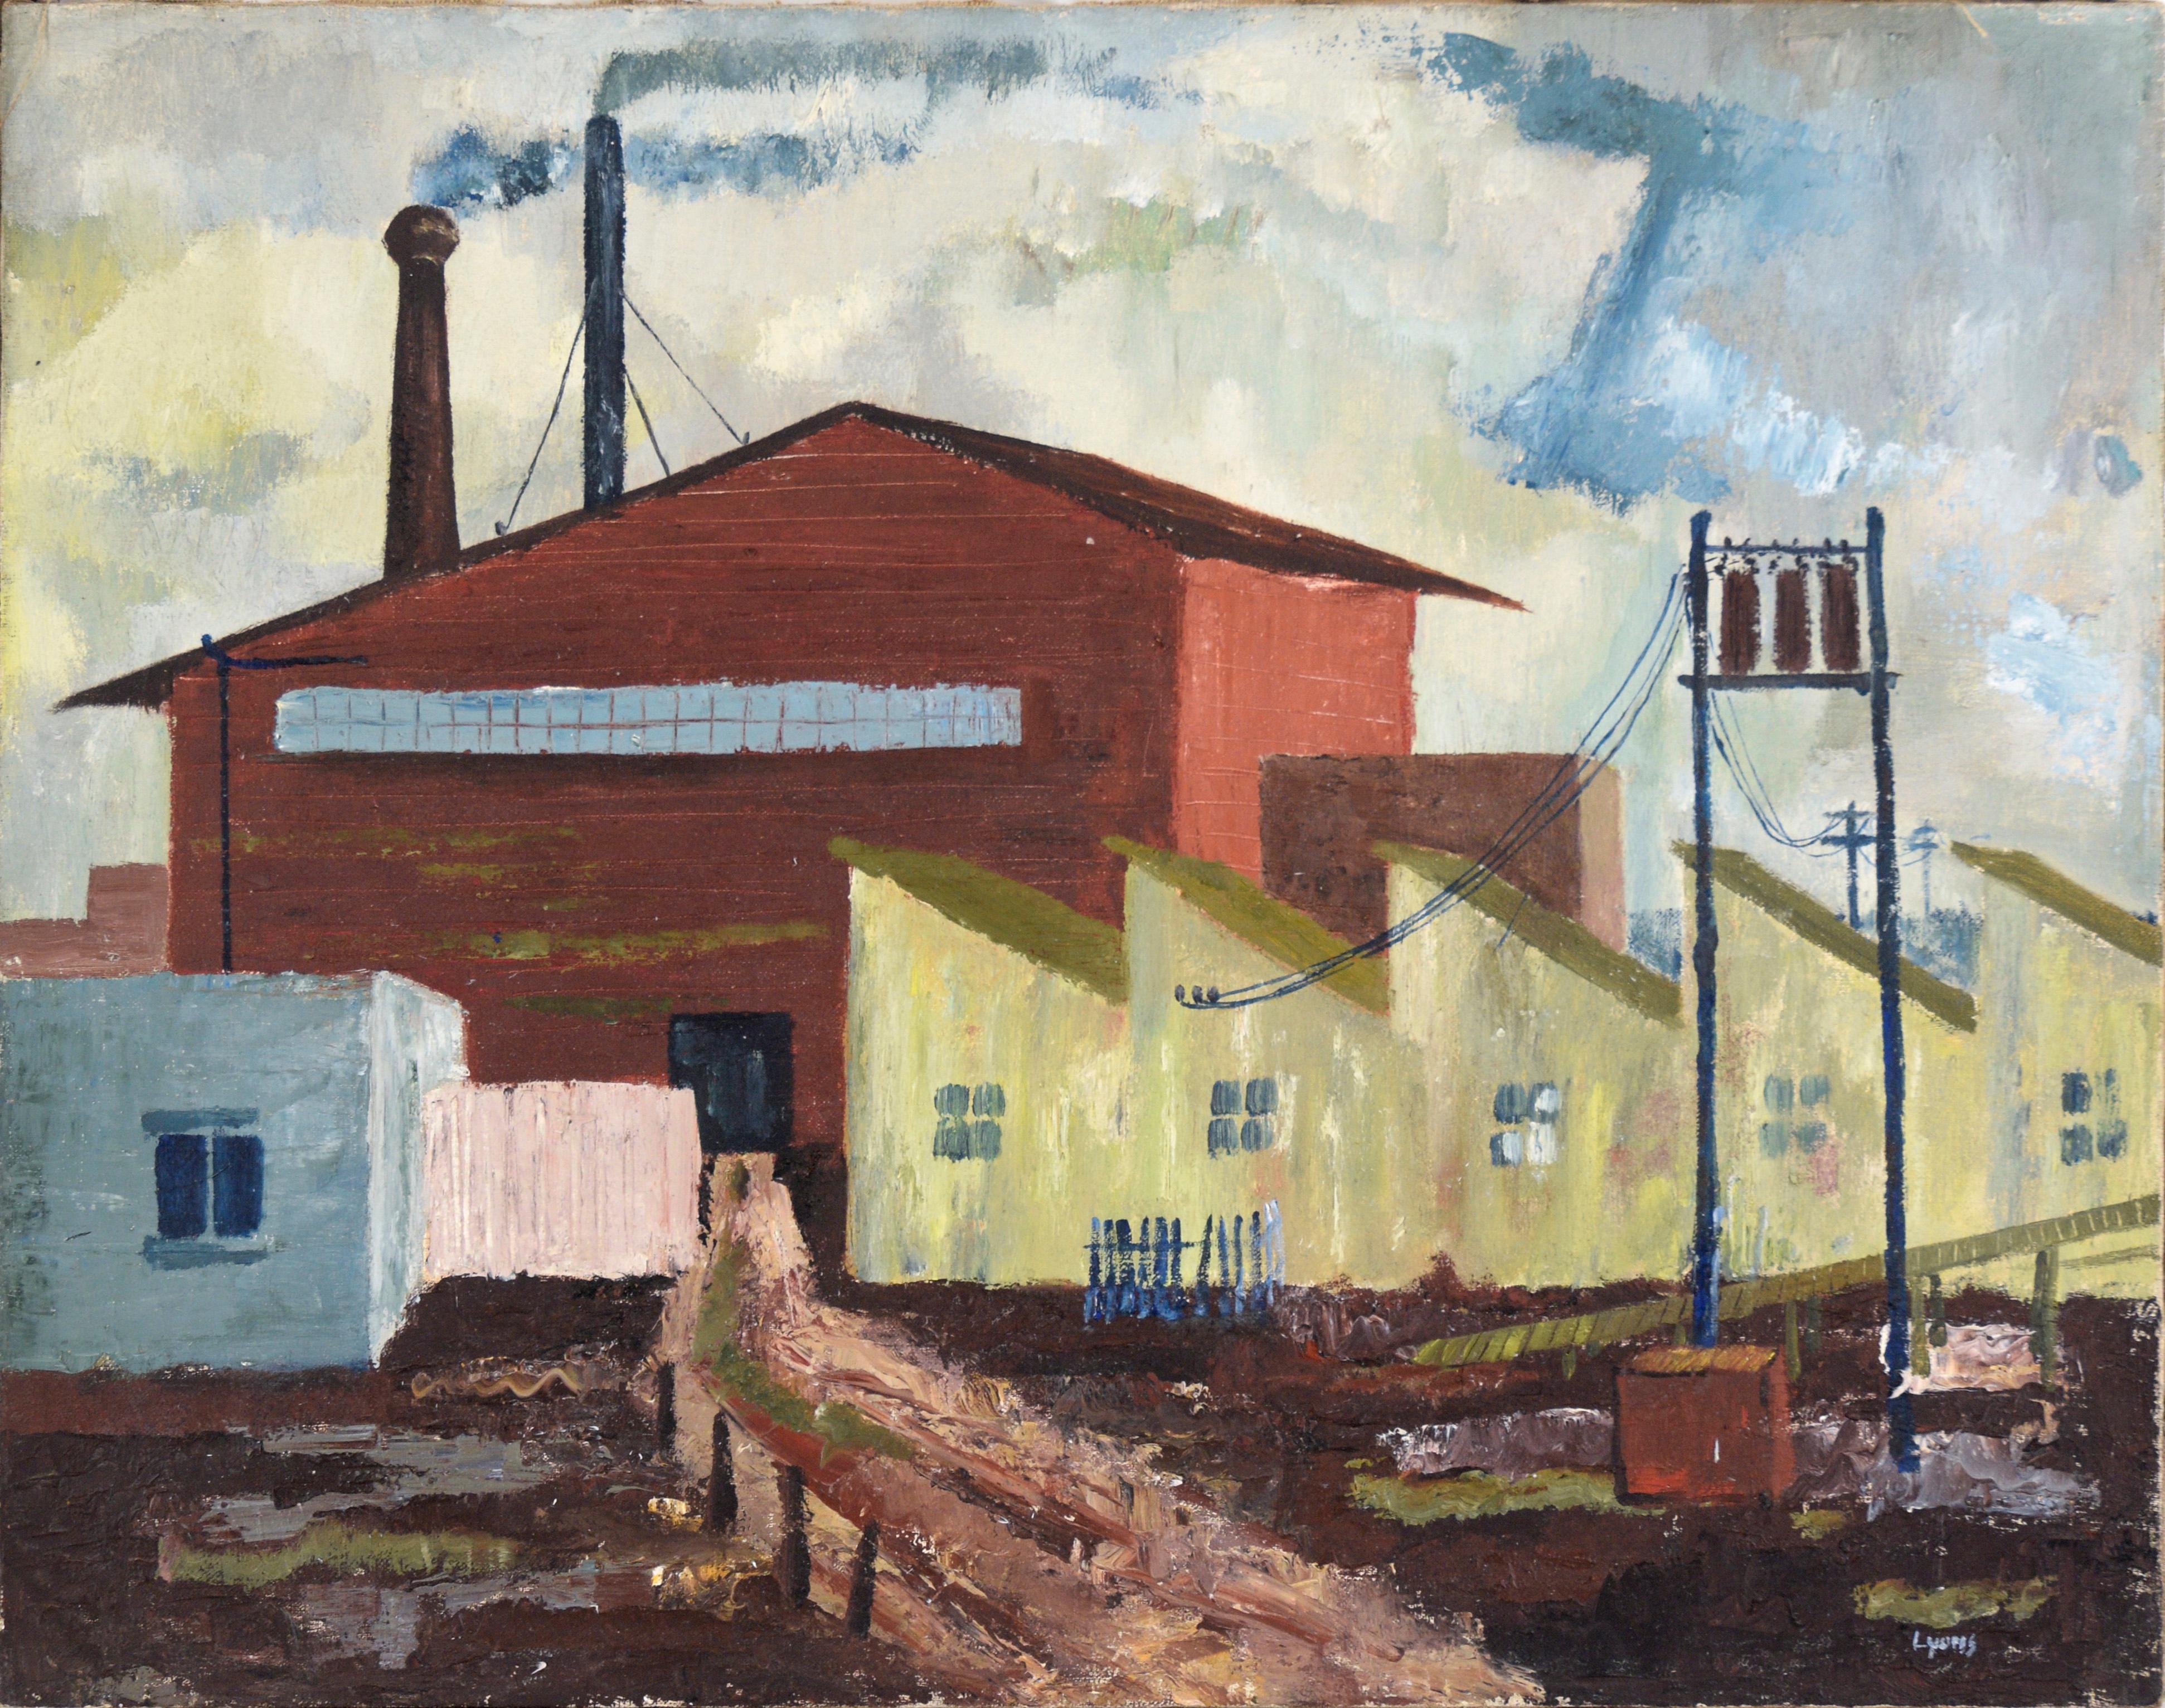 Doris Lyons Hoover Landscape Painting - Industrial Landscape with Row Houses in Oil on Linen